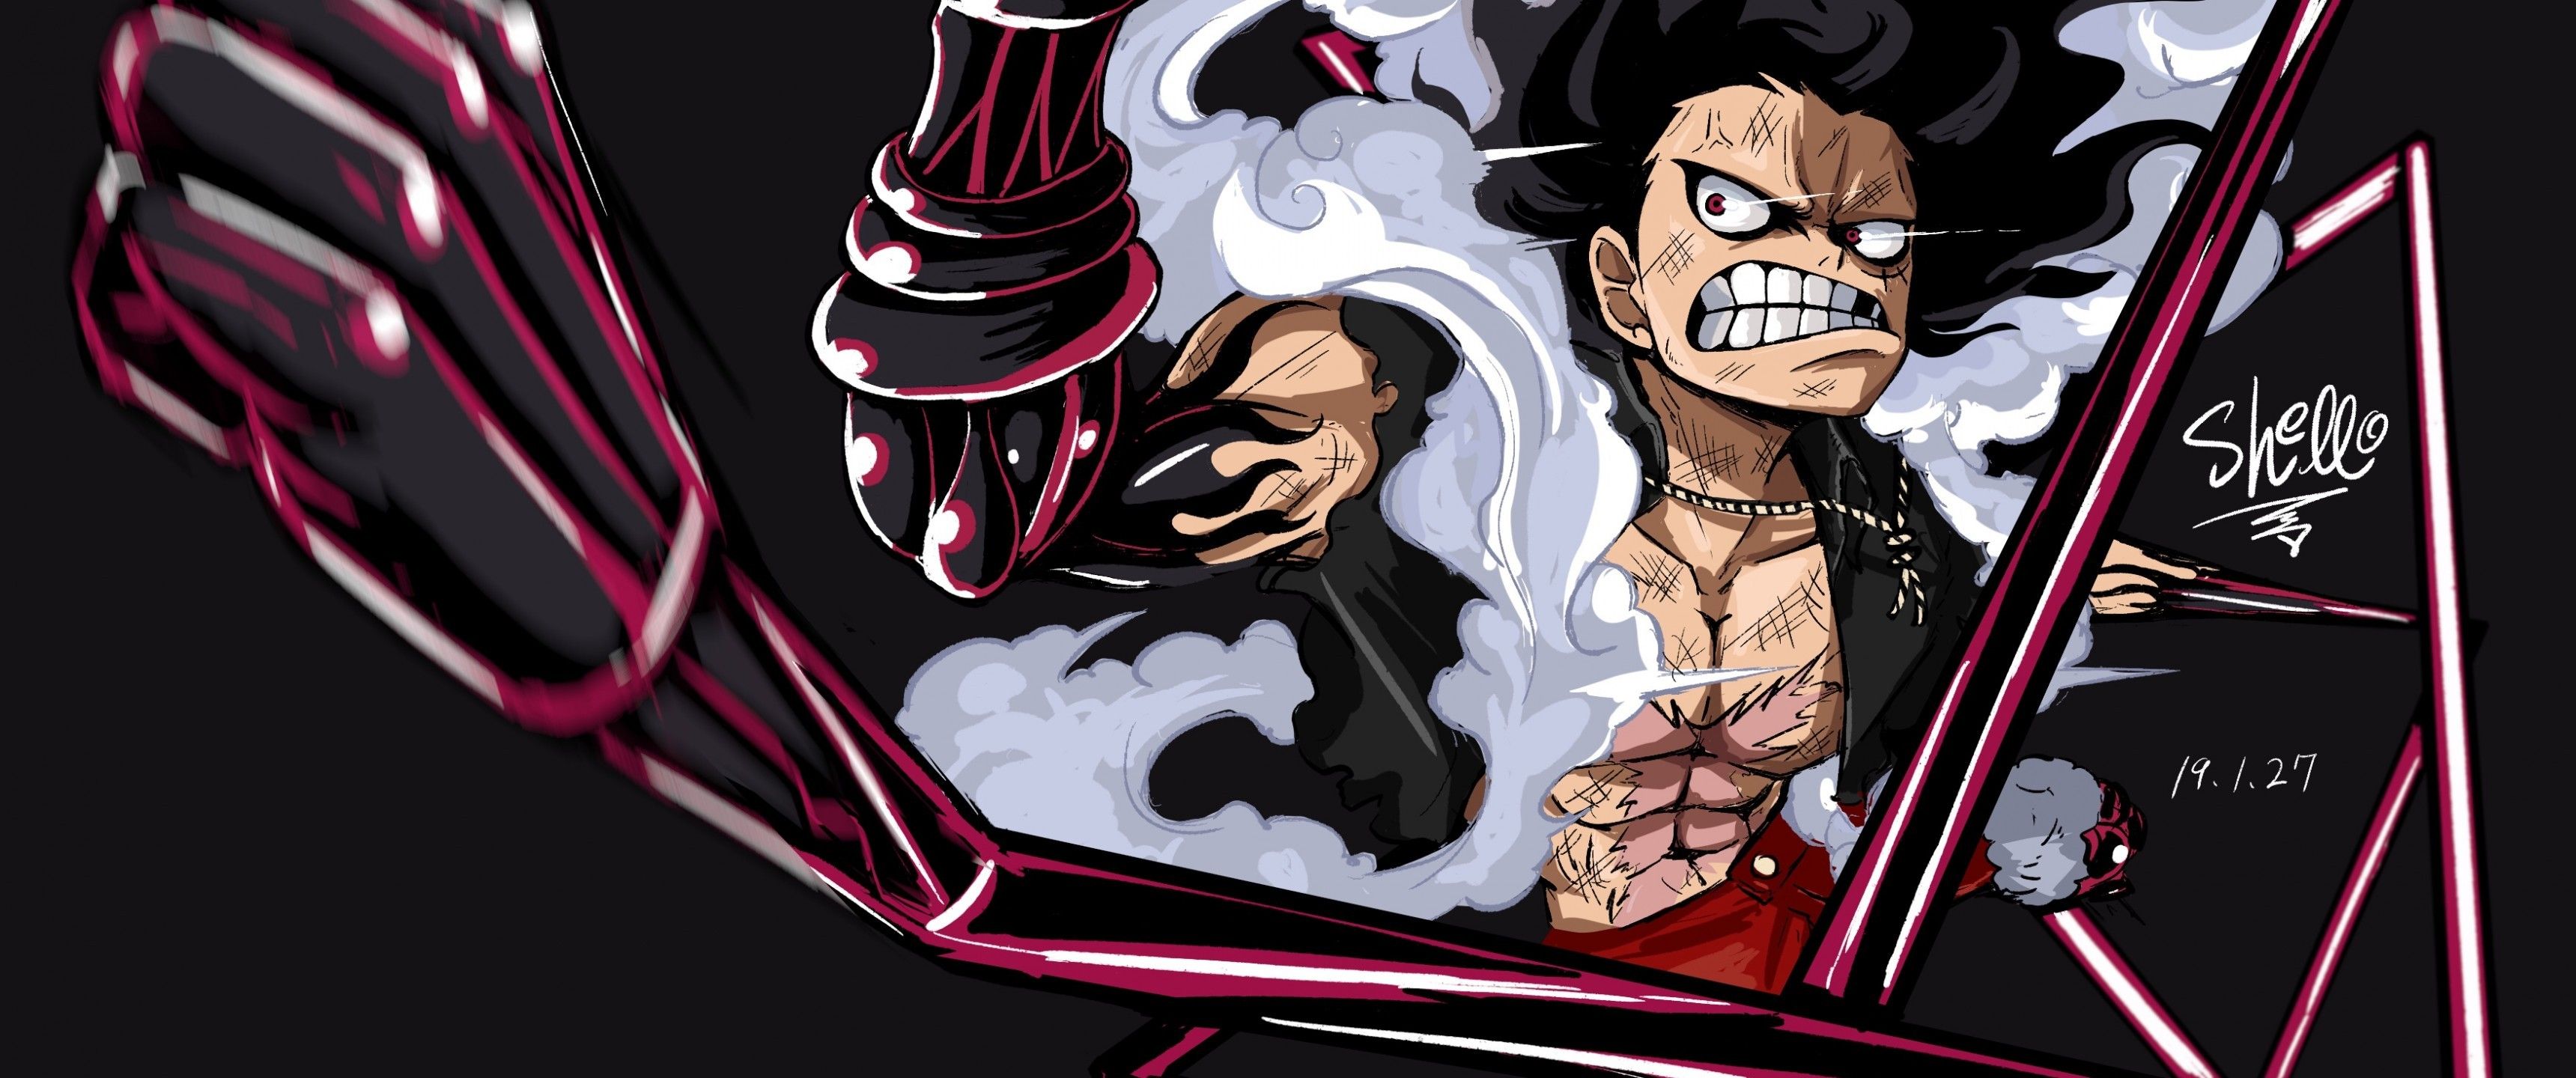 Download 3440x1440 Monkey D. Luffy, One Piece, Fist, Angry Wallpaper